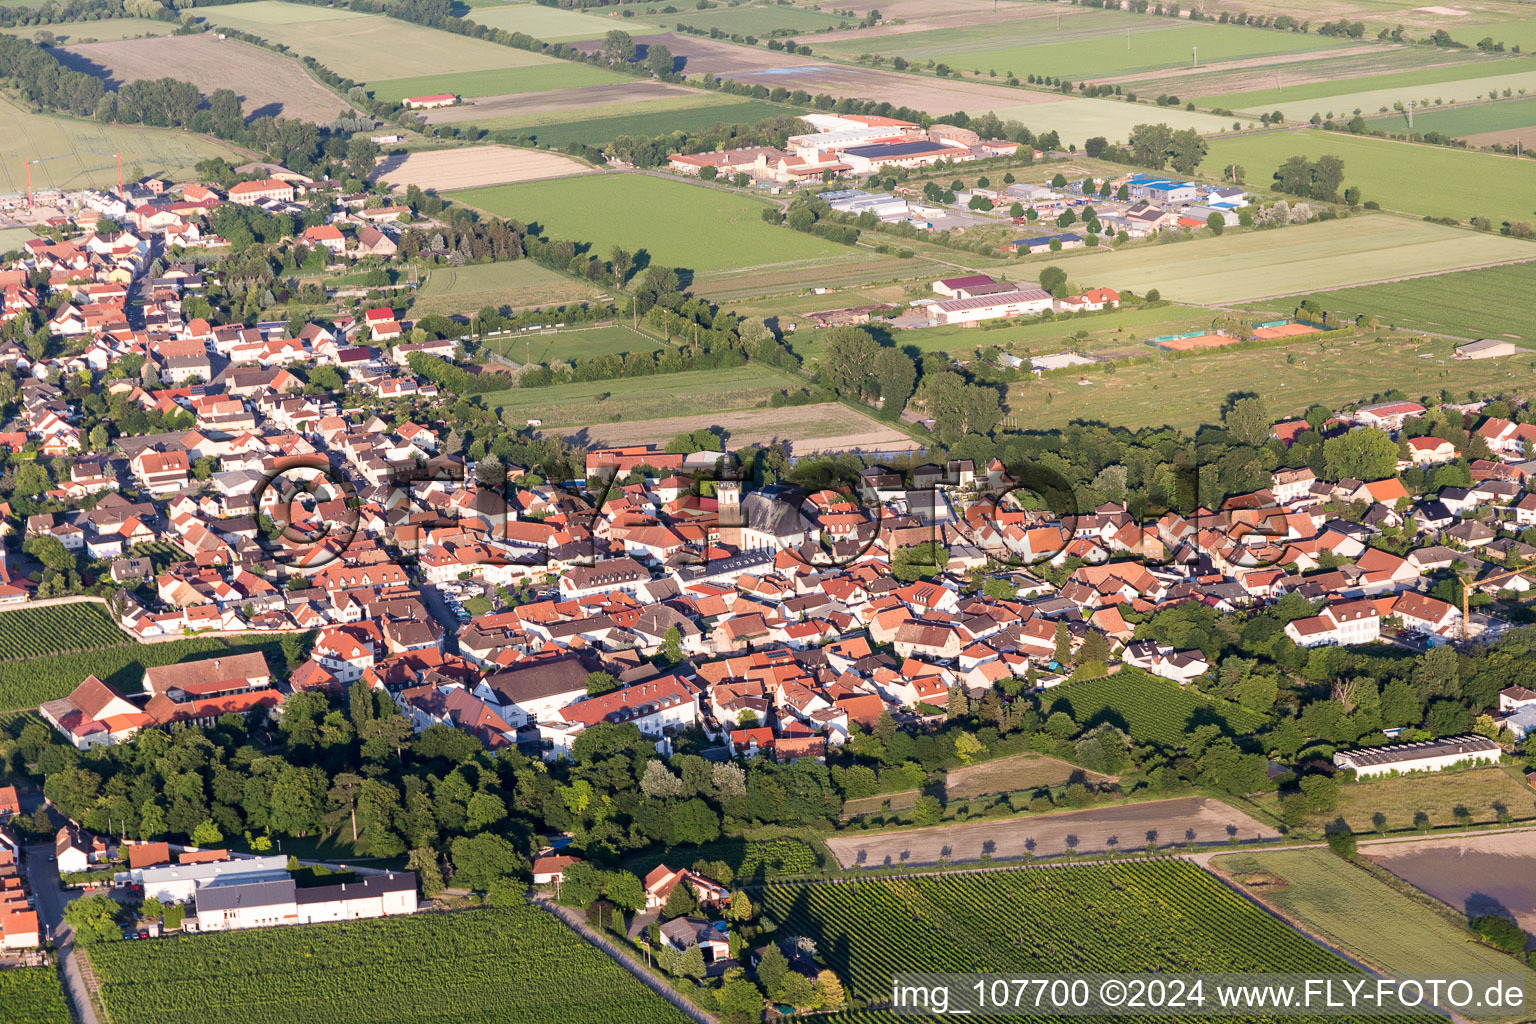 Aerial photograpy of Agricultural land and field borders surround the settlement area of the village in Dirmstein in the state Rhineland-Palatinate, Germany